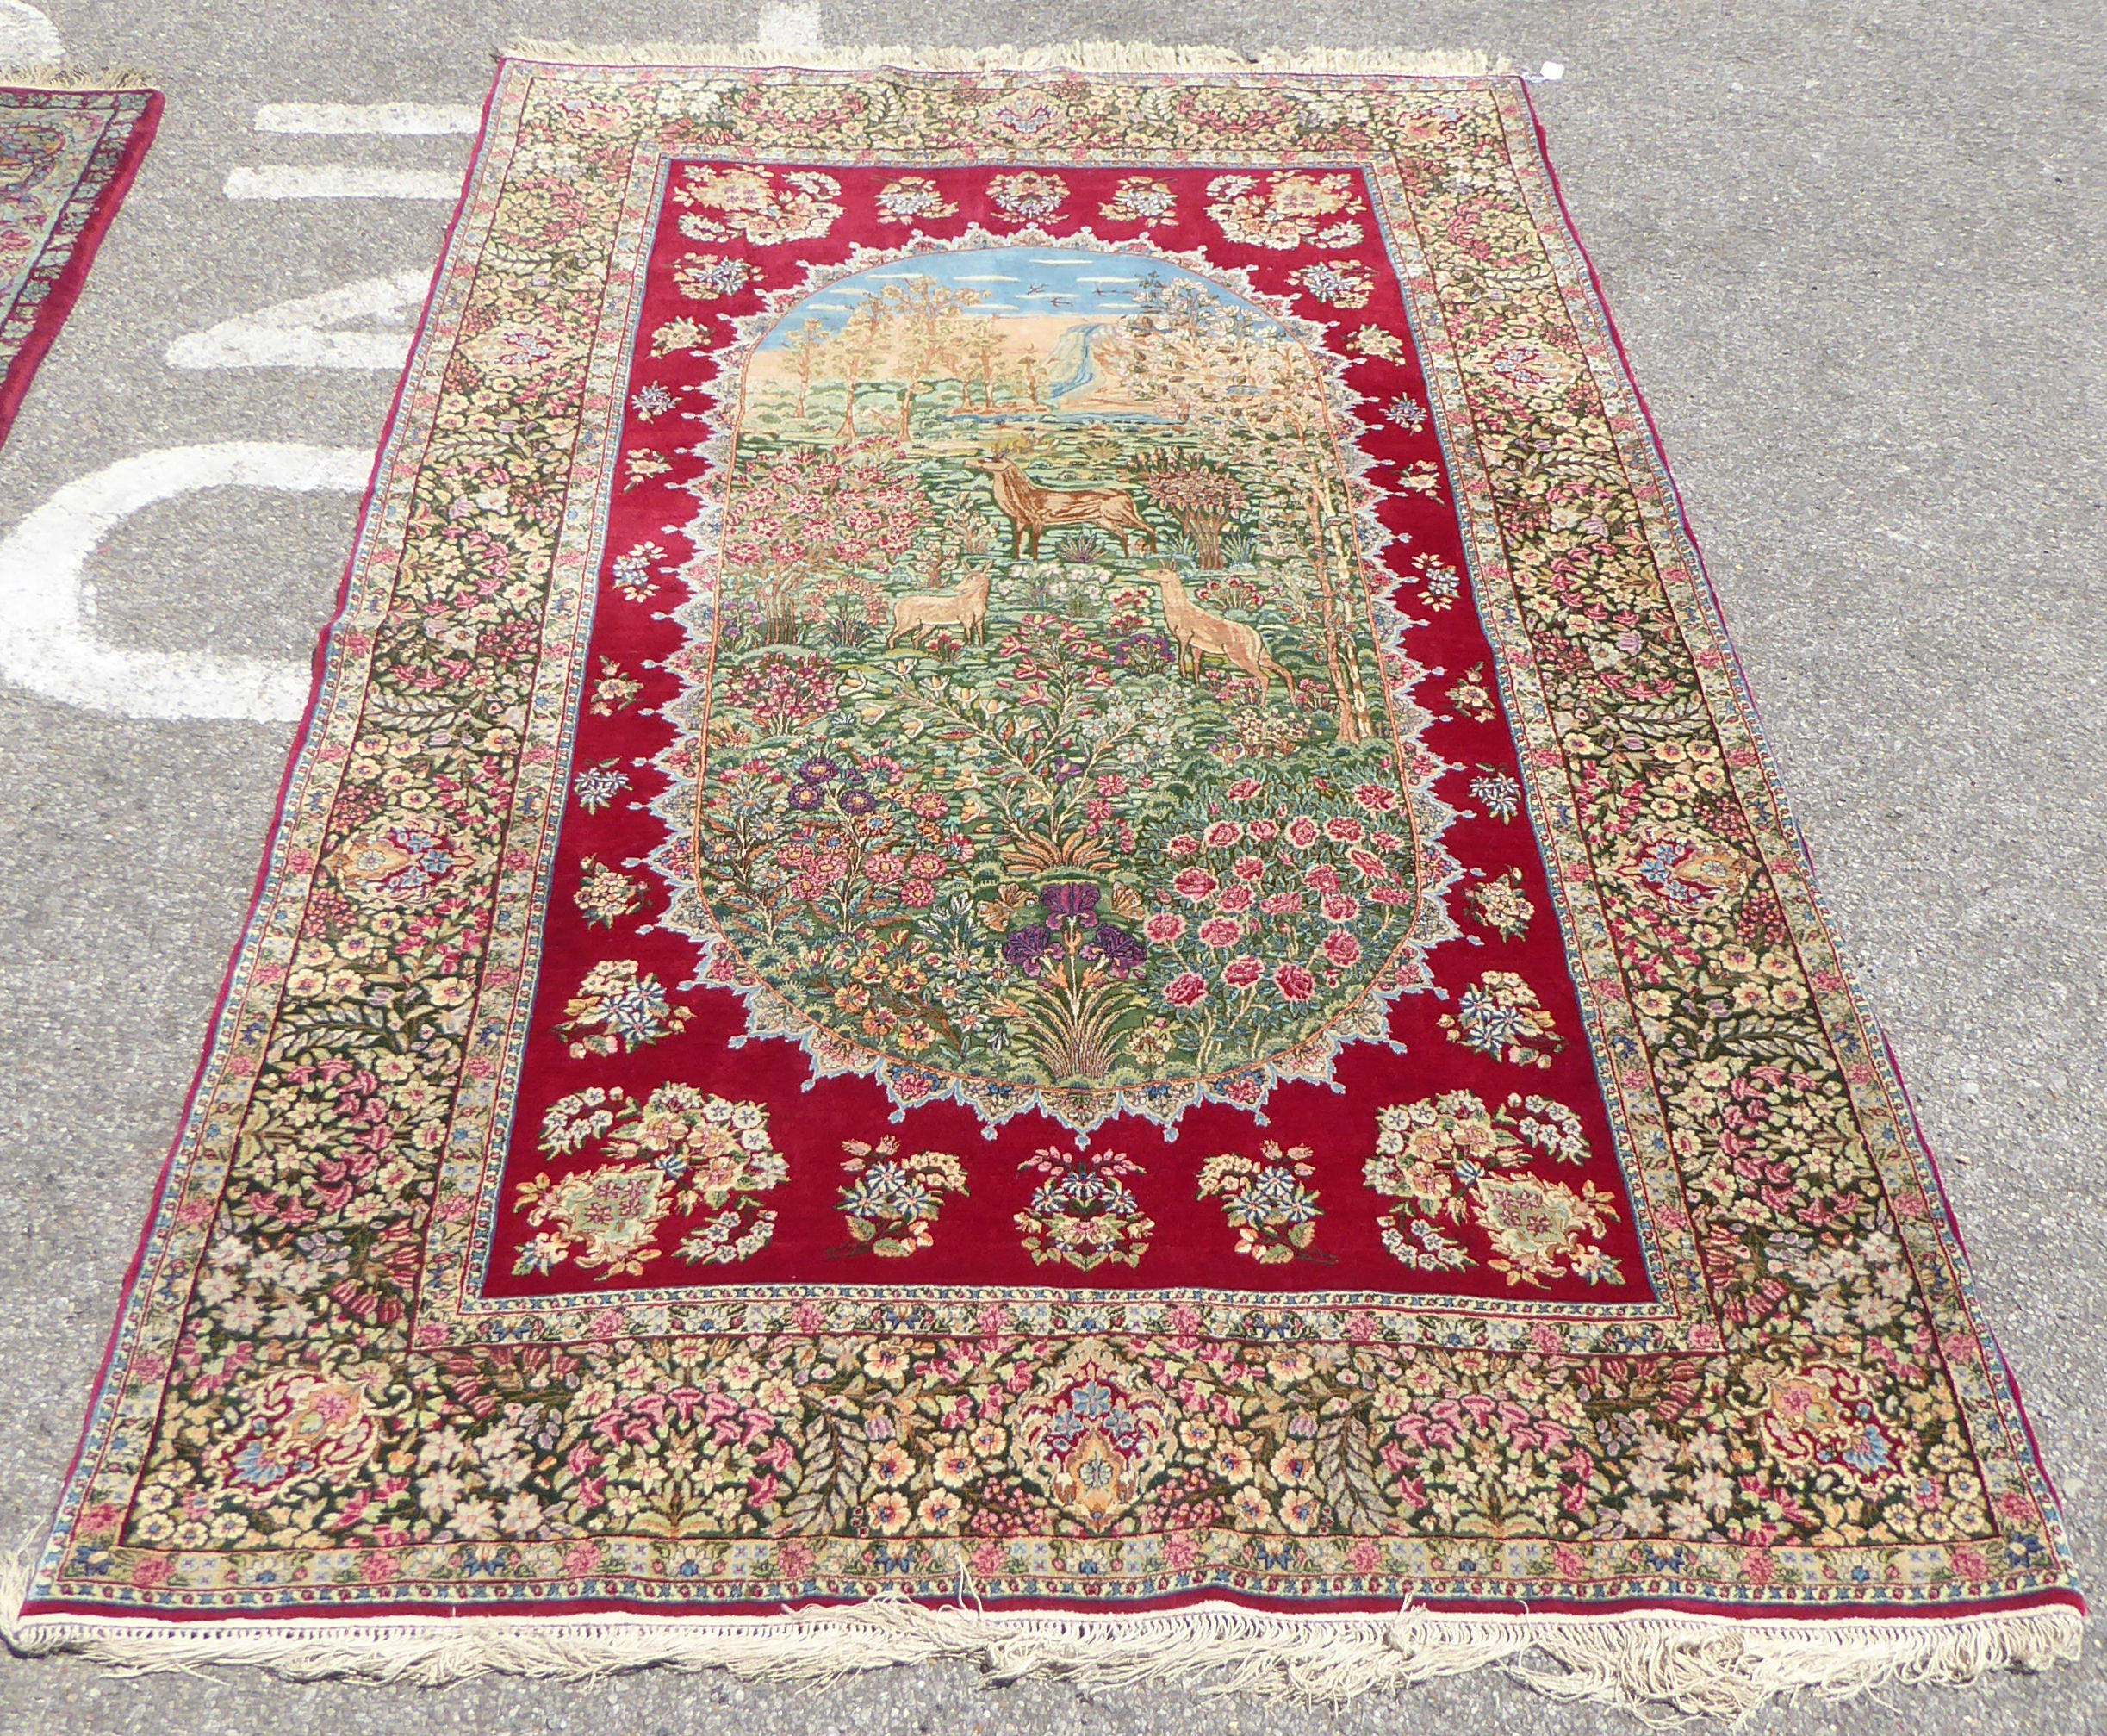 A Persian rug, decorated with pictorial cartouche, featuring deer in a woodland setting, bordered by